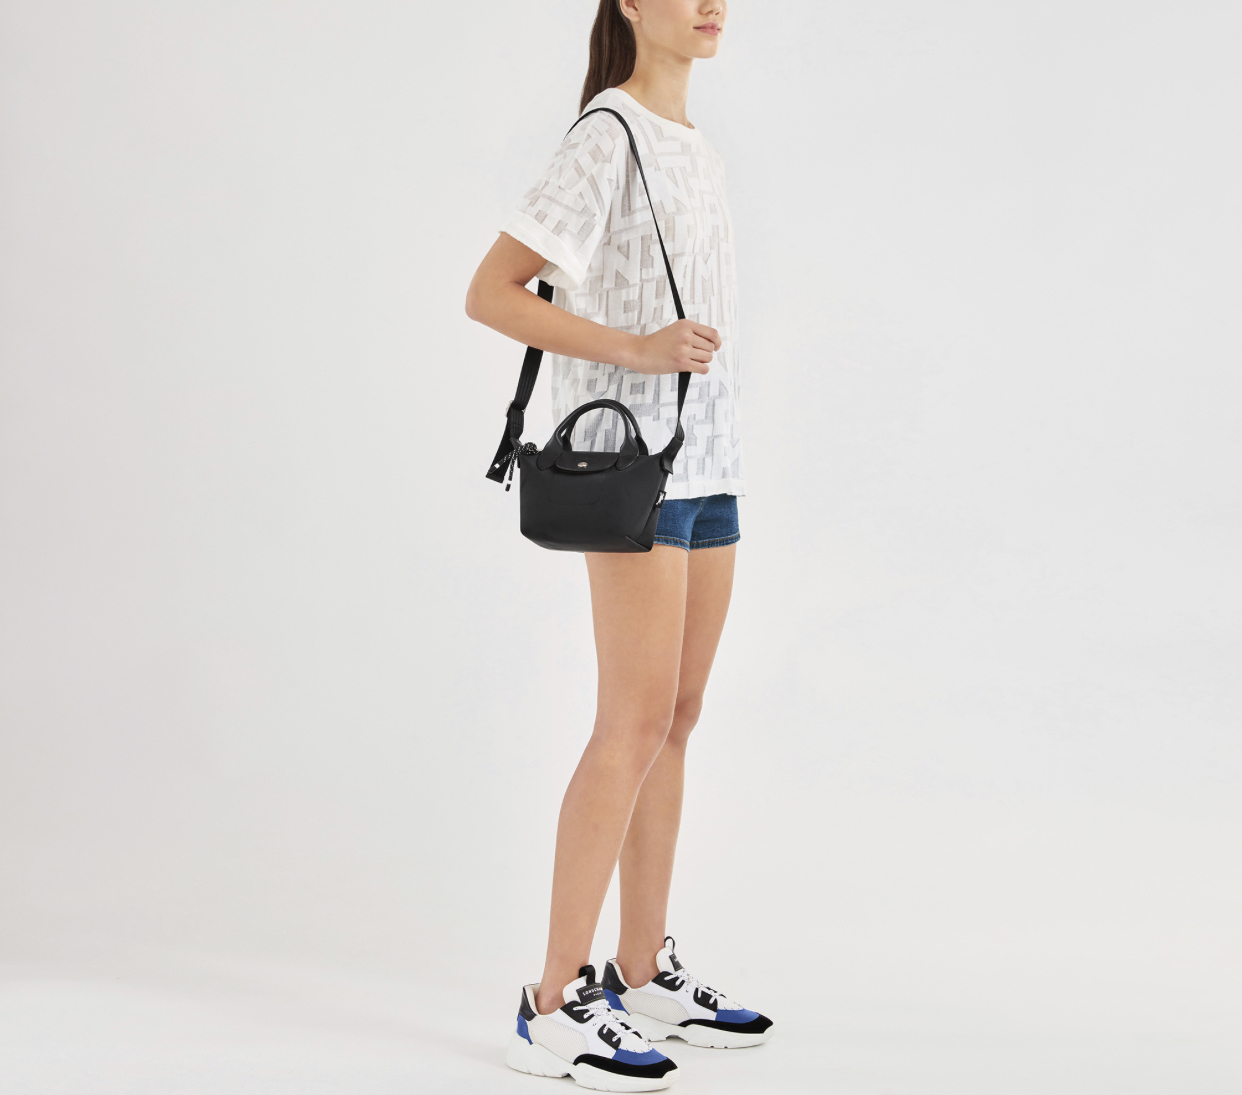 Small Le Pliage Energy Recycled Canvas Crossbody Bag